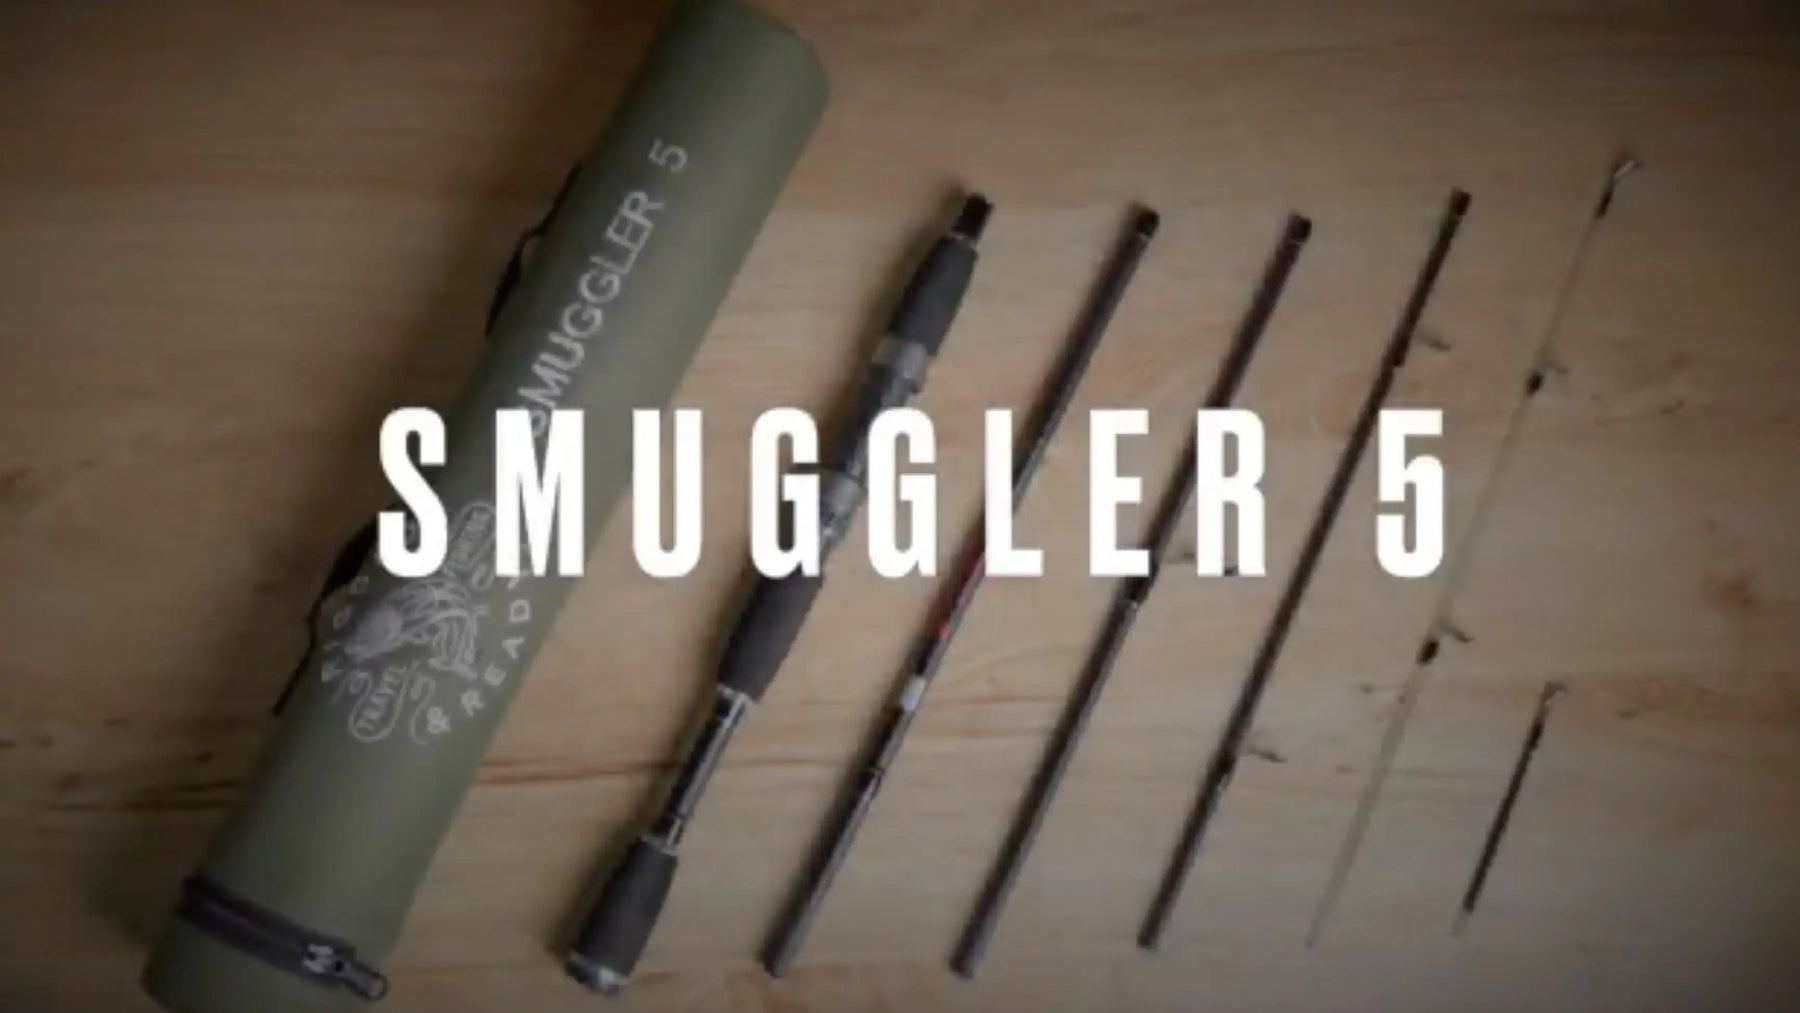 Smuggler 5 160cm 5' 4 +140cm 4' 7 Travel Fishing Rod + 2 tips – Rigged  and Ready